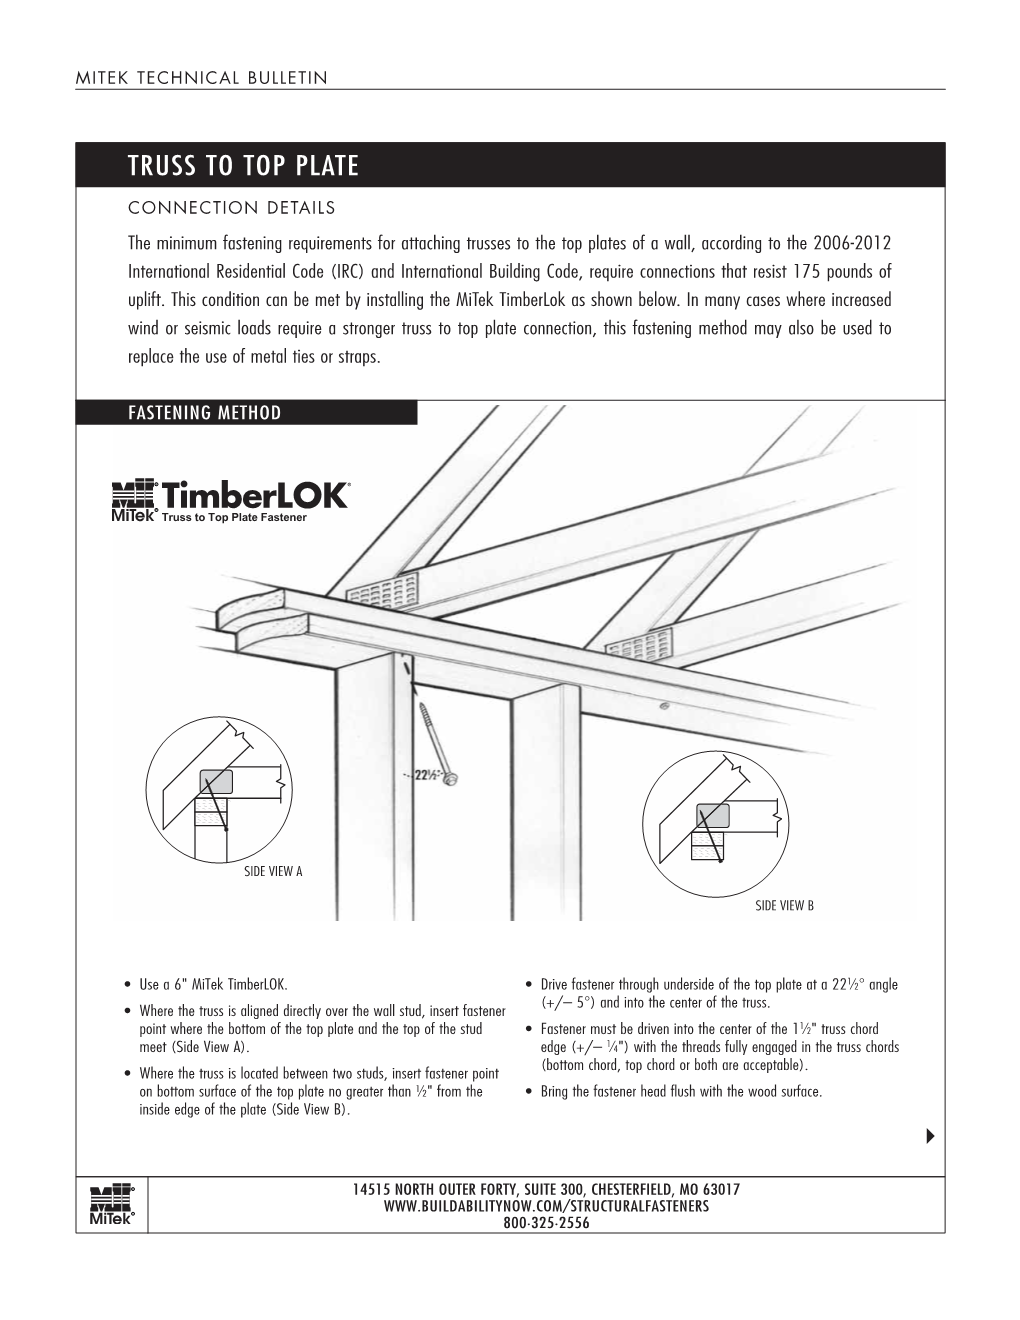 Truss to TOP PLATE